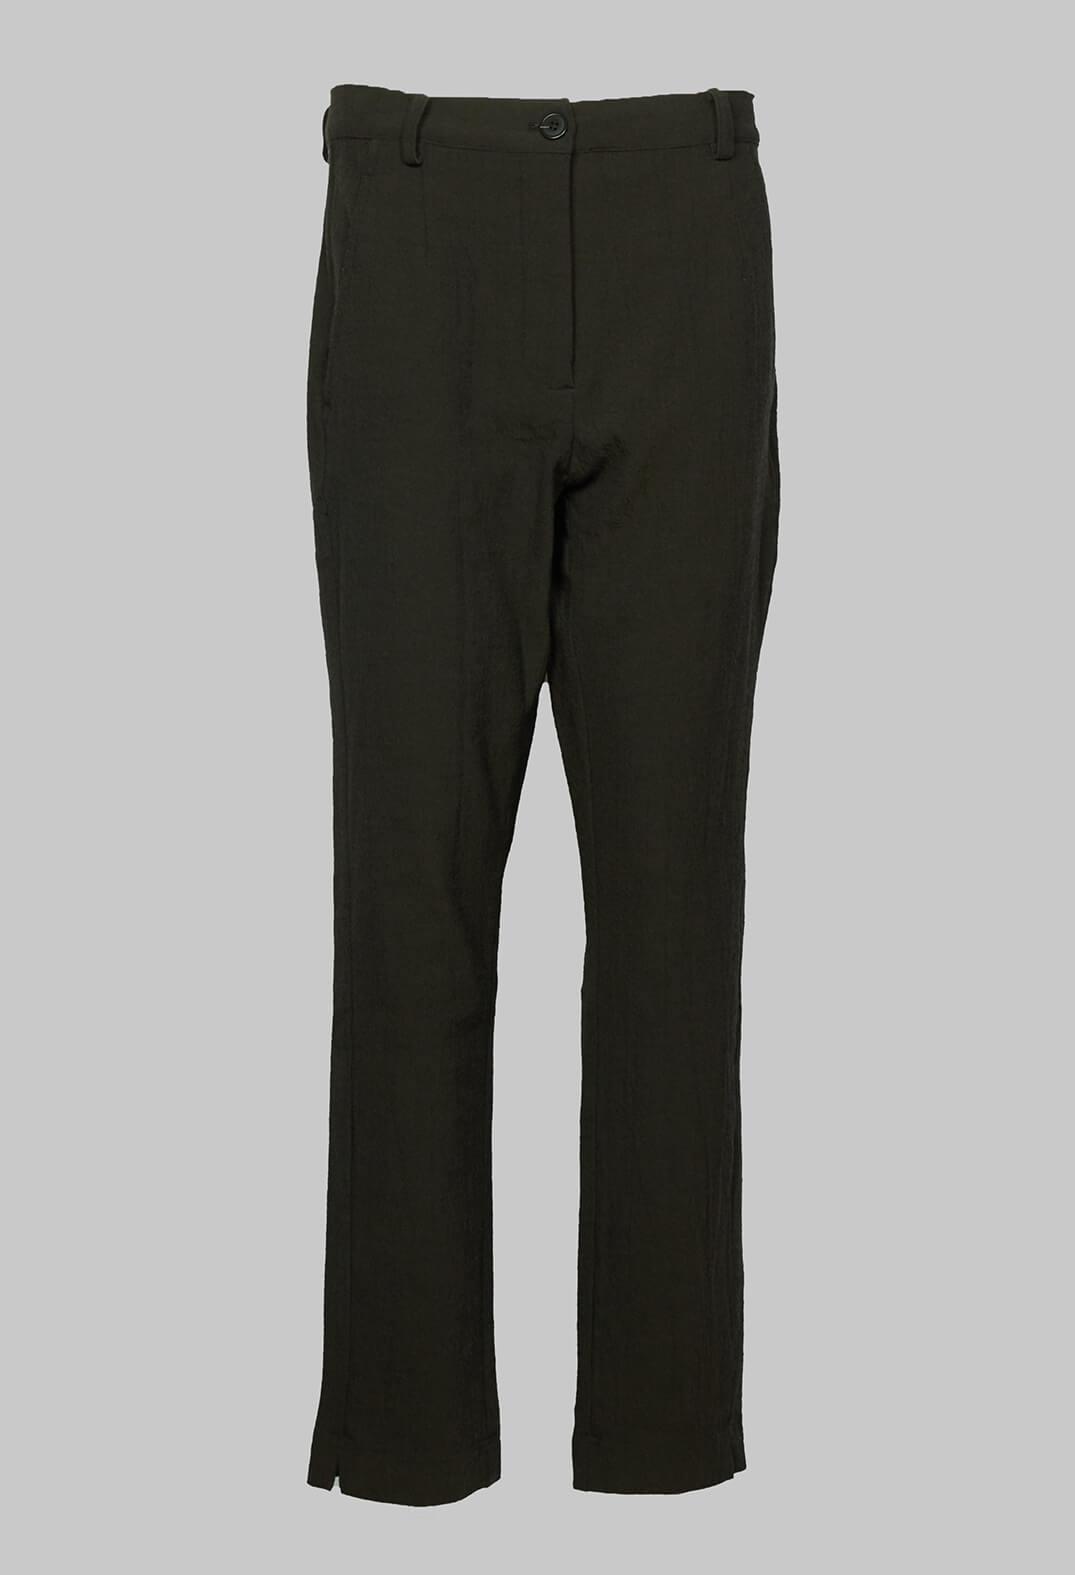 Tailored Slim Leg Trousers in Teal